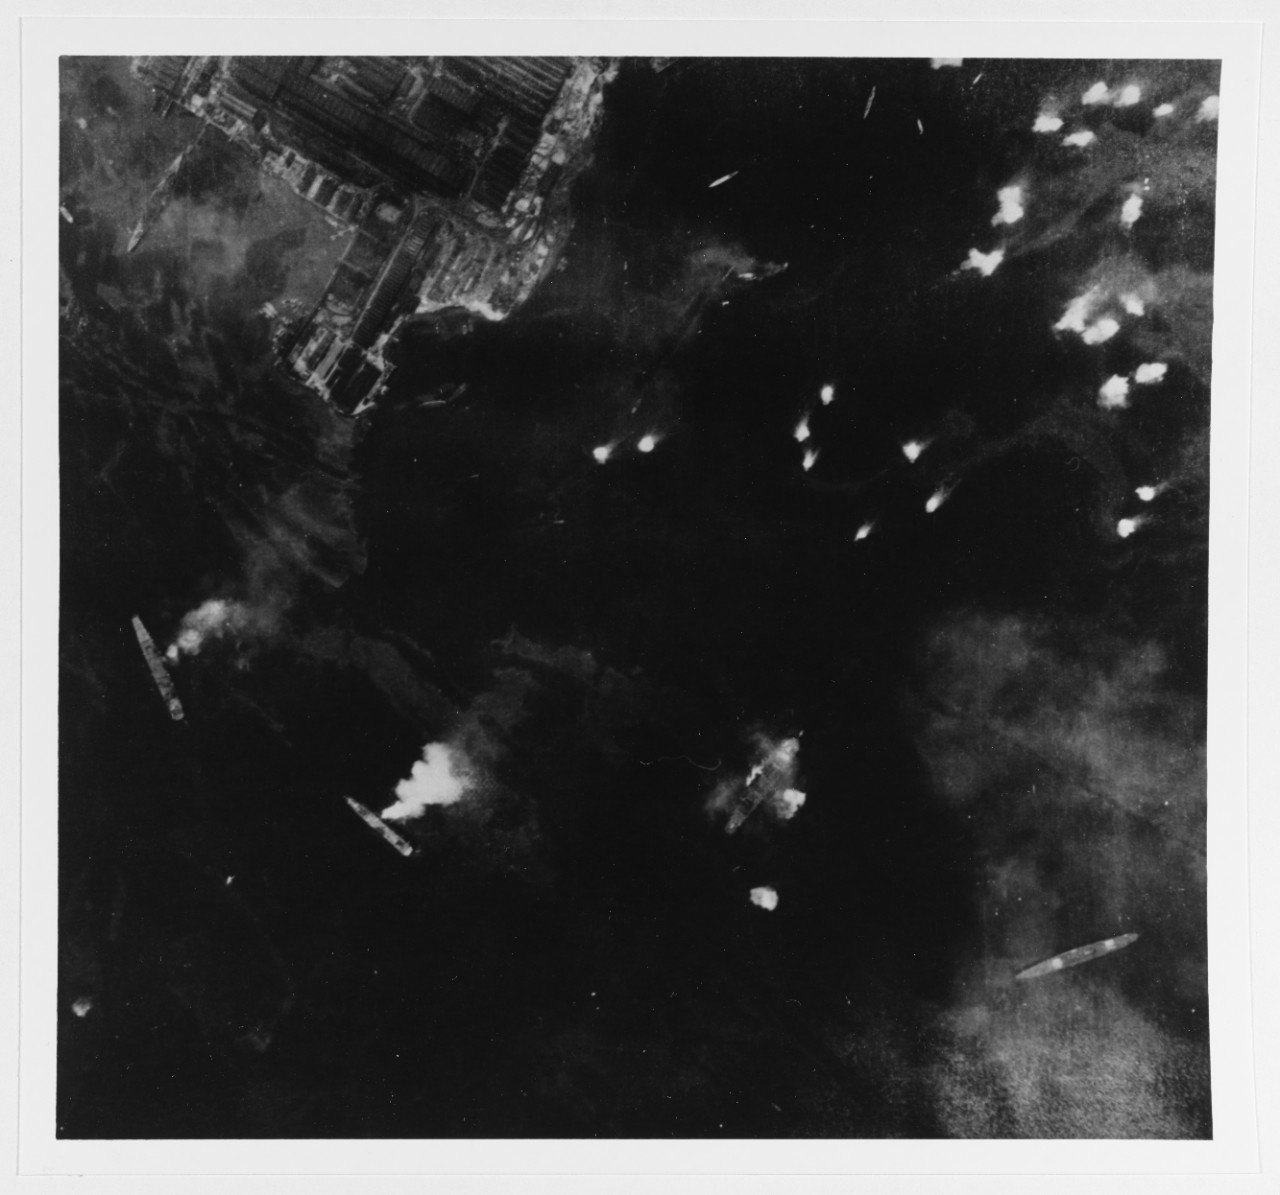 Carrier Raids on Japan, March 1945